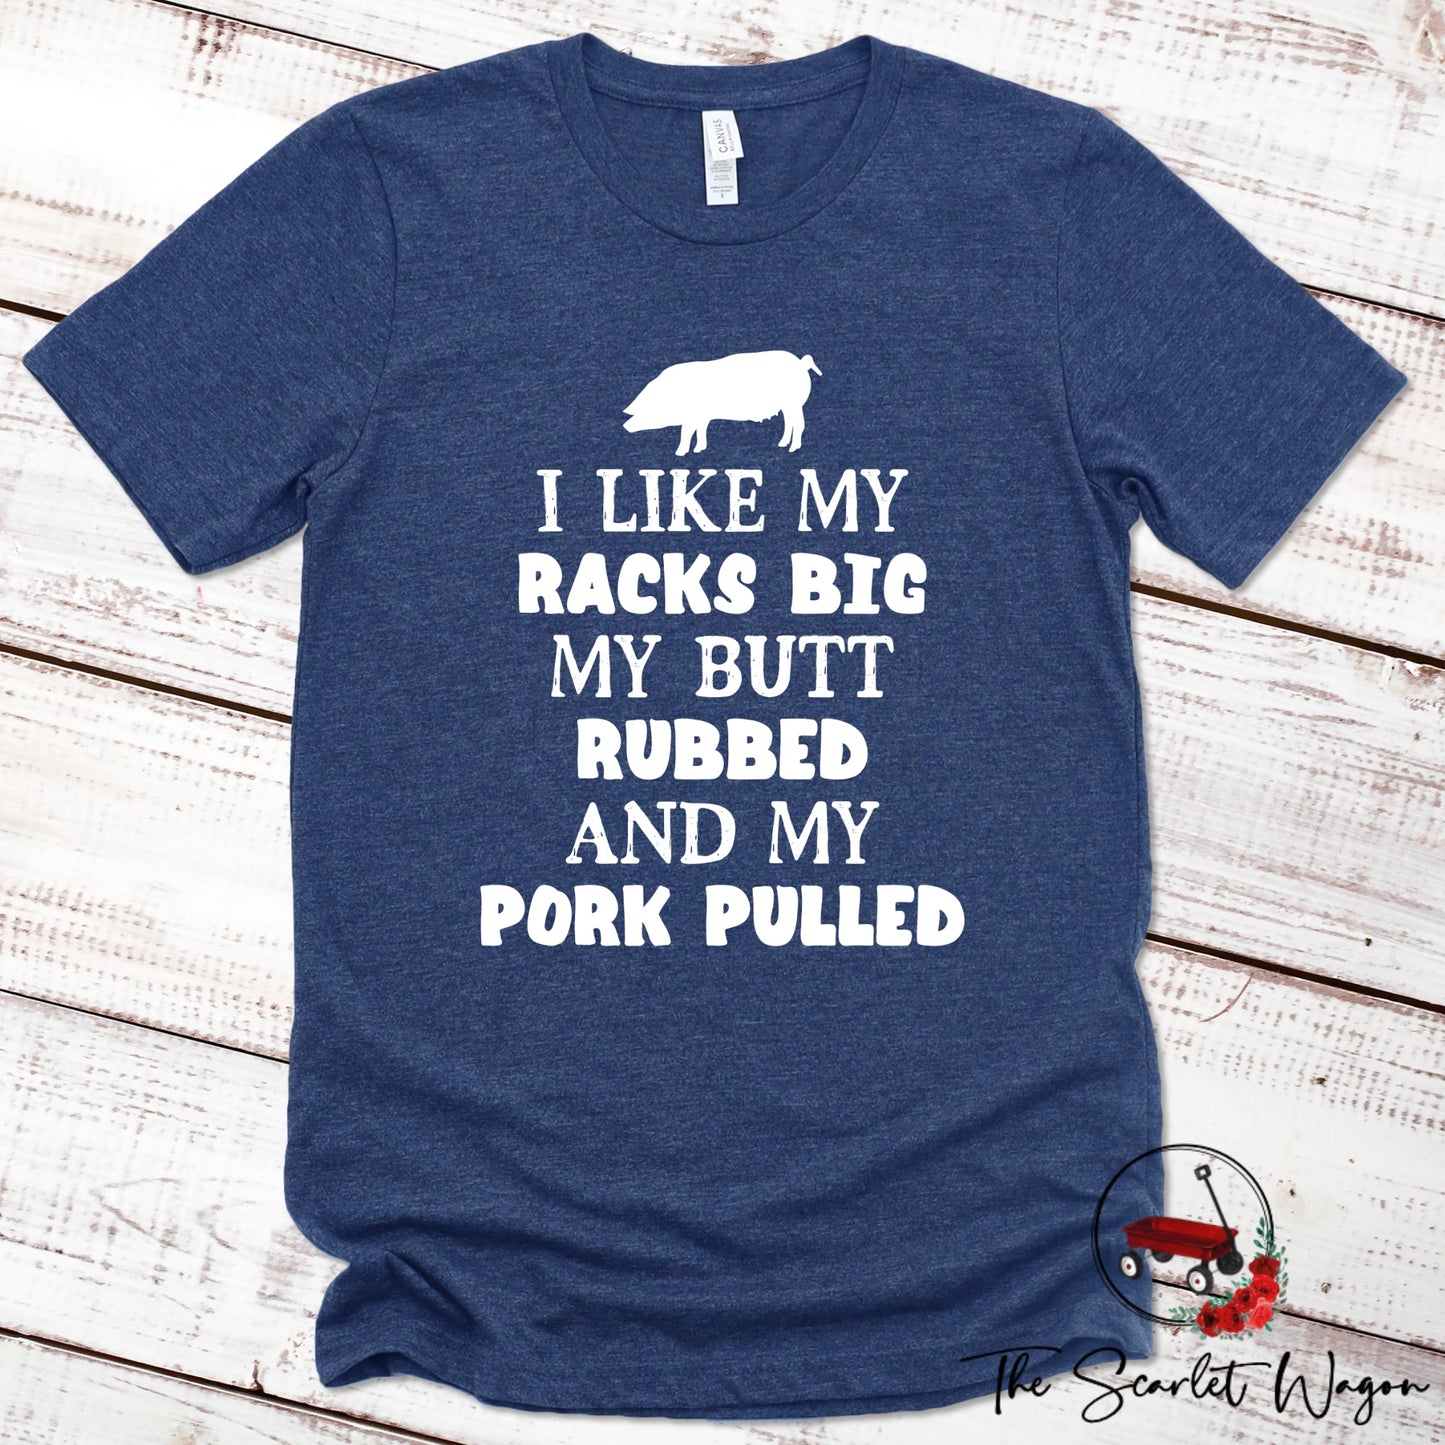 I Like My Racks Big, My Butt Rubbed and My Pork Pulled Premium Tee Scarlet Wagon Heather Navy XS 